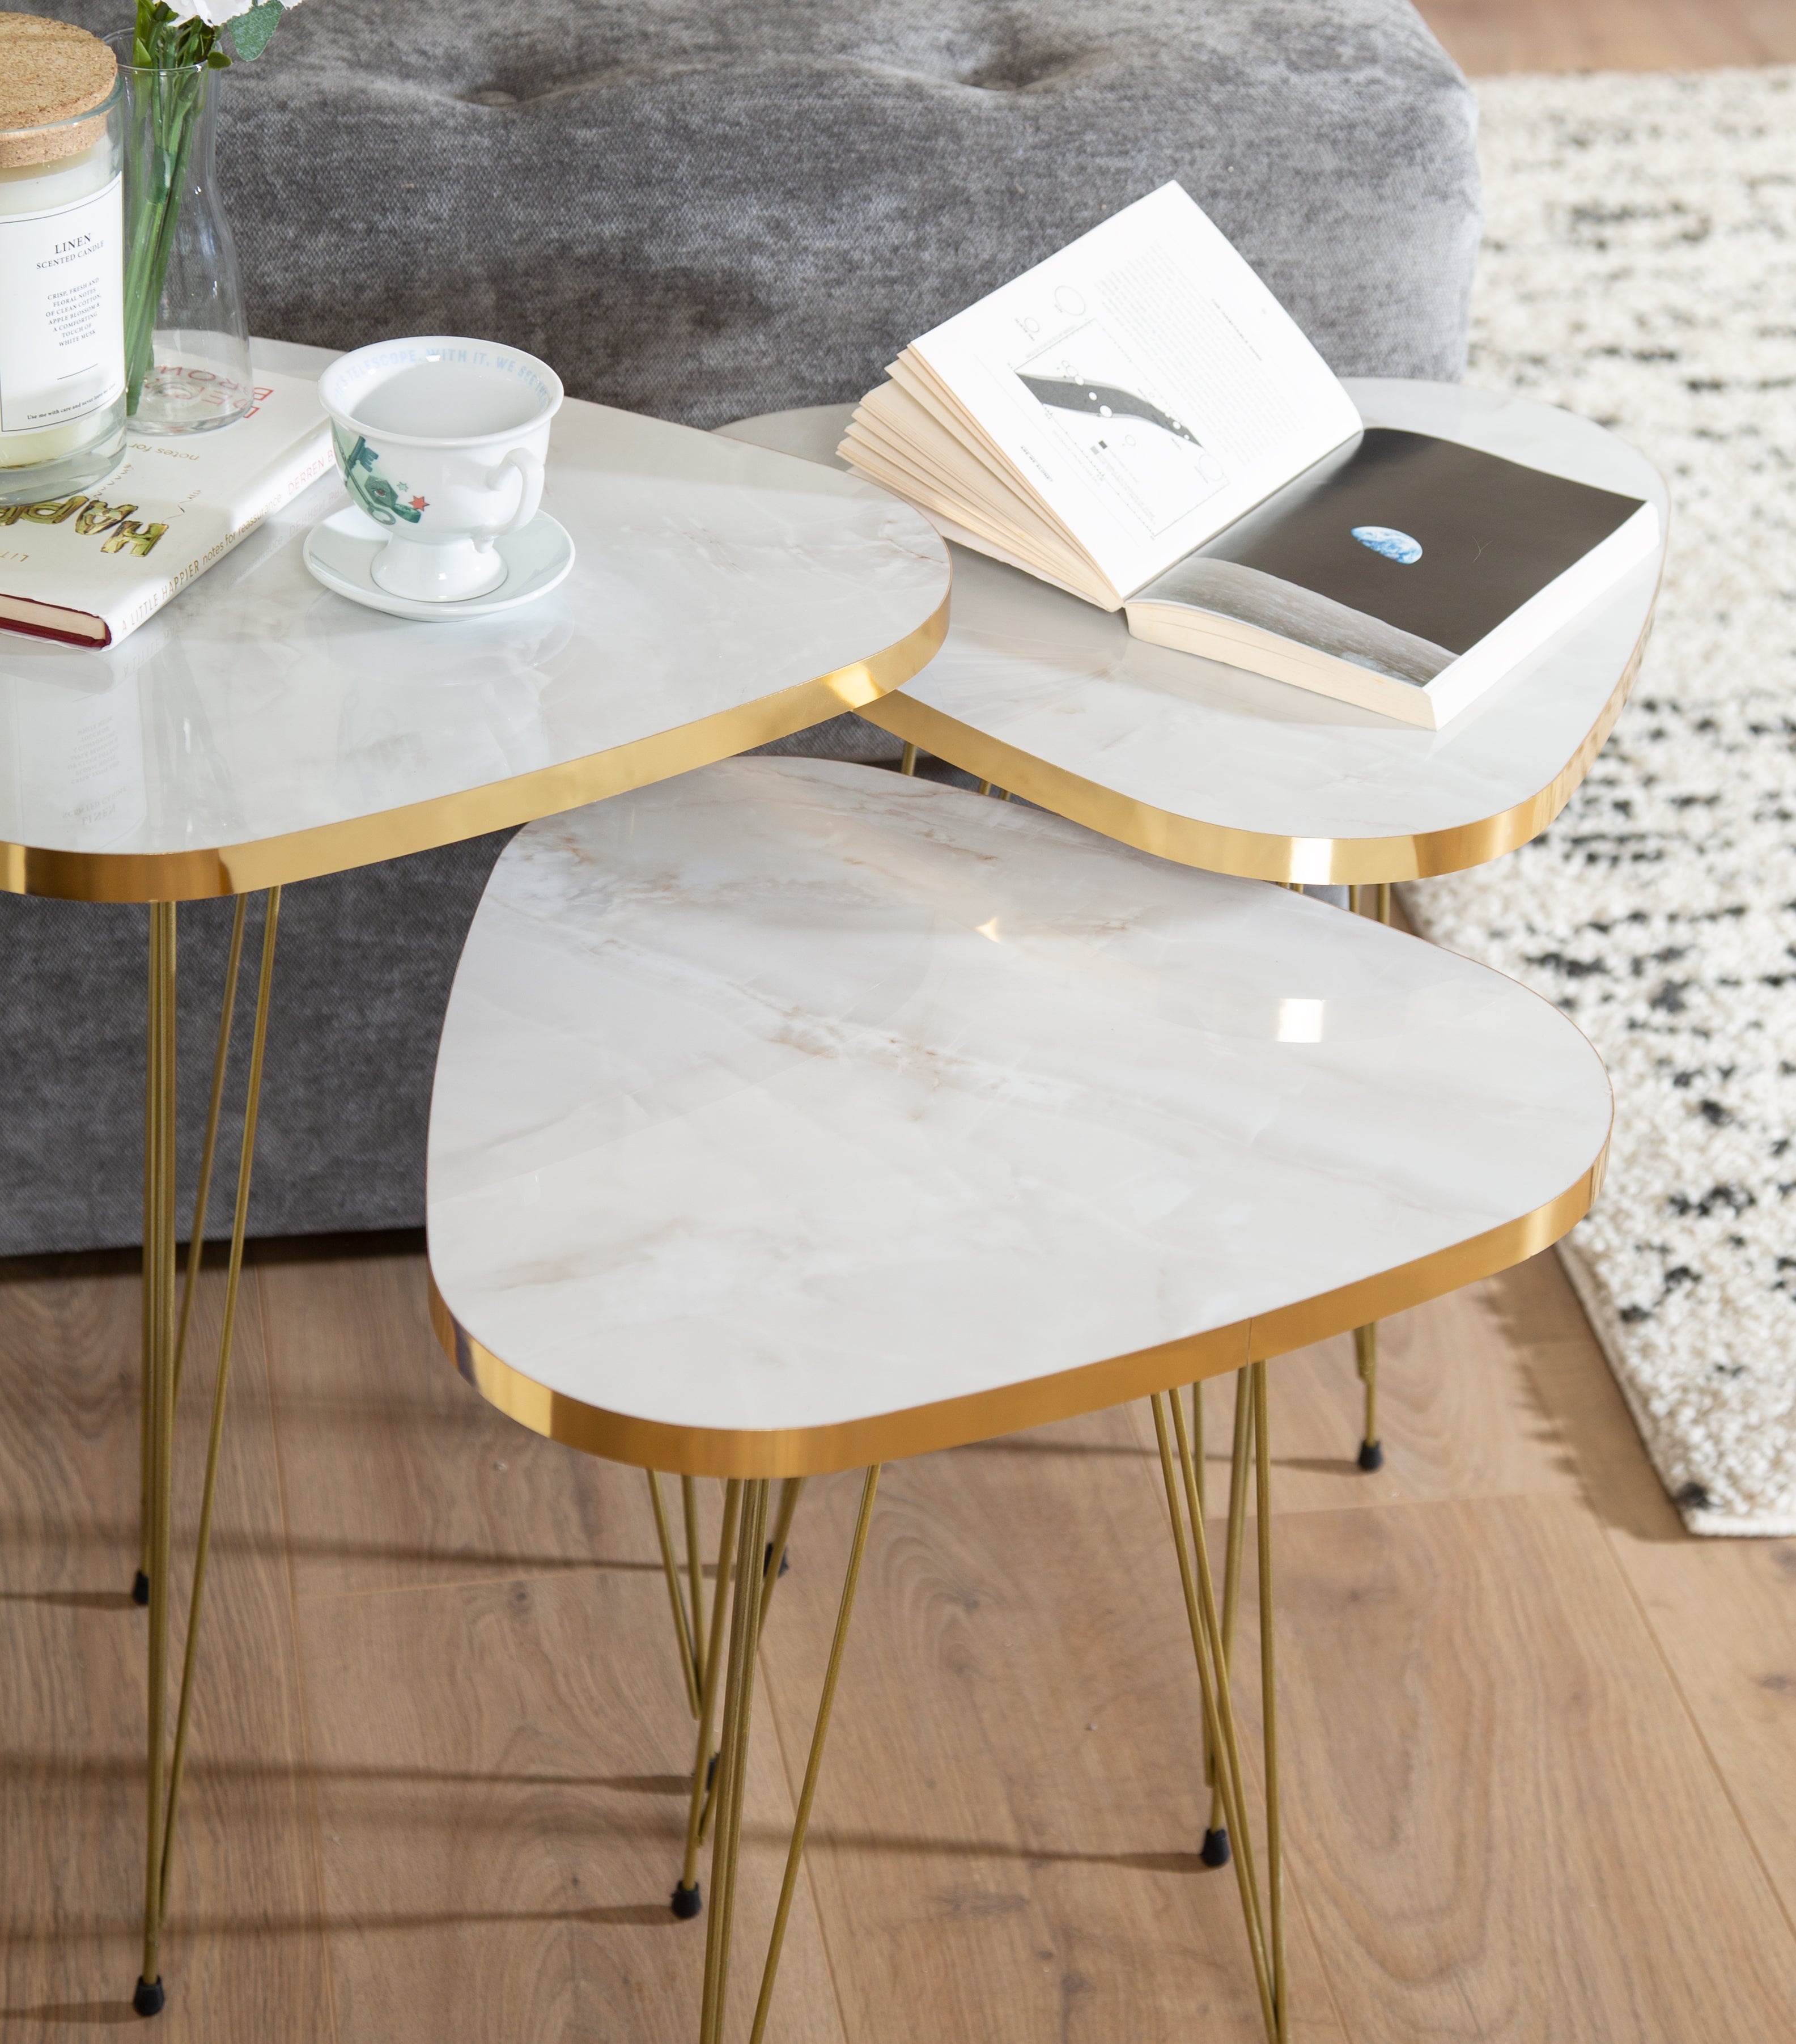 Tigris Set of 3 Triangle Side Tables - White & Gold Marble